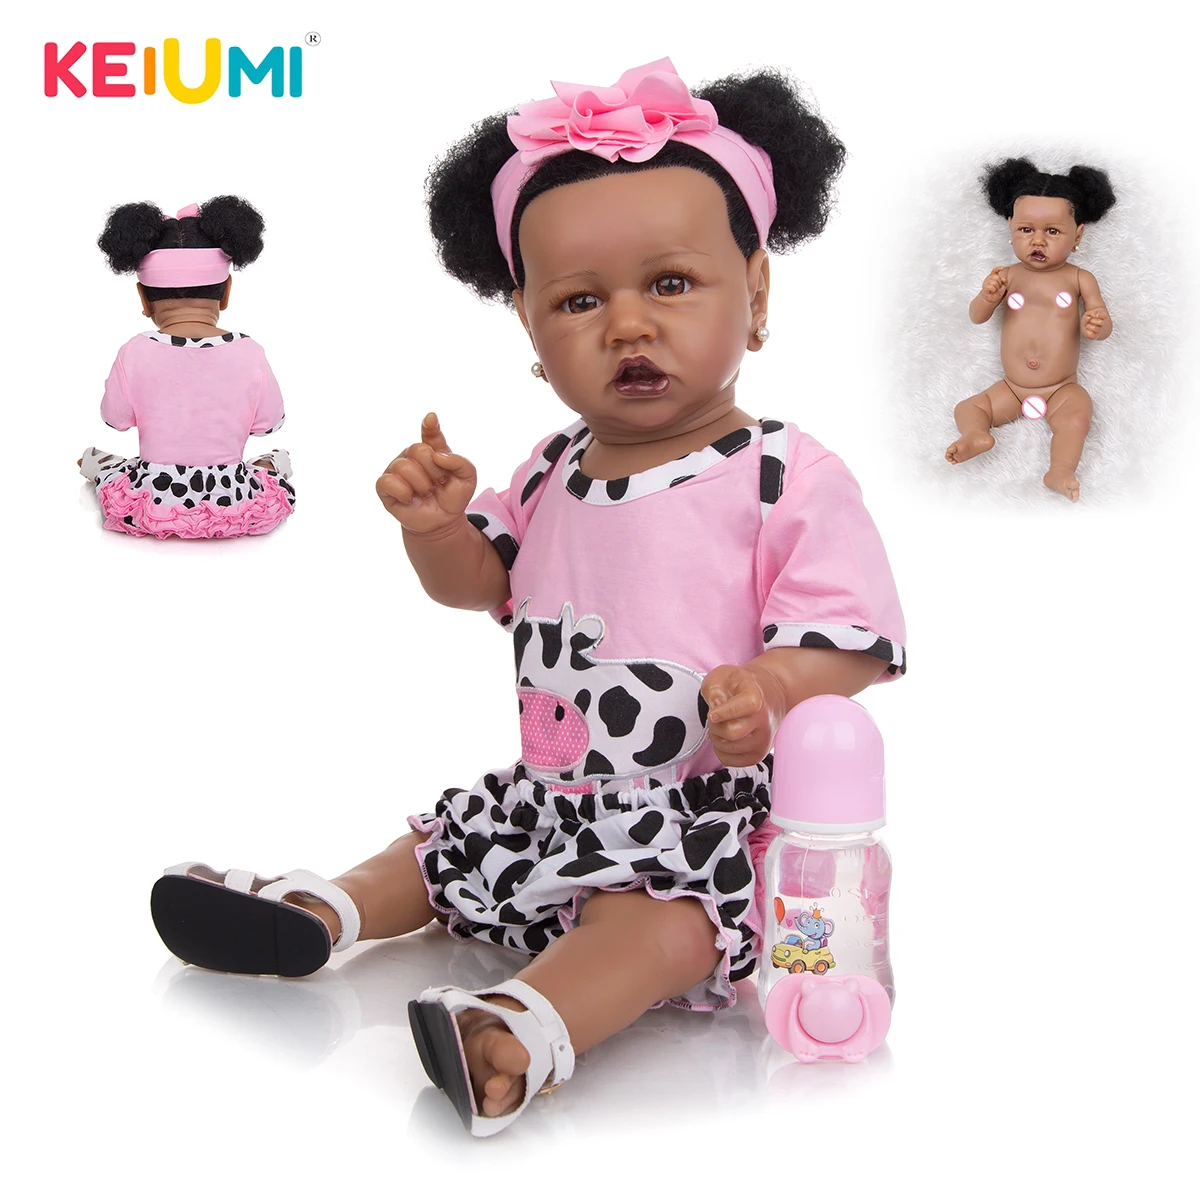 

KEIUMI 23 Inch Lifelike Full Silicone Reborn Baby Dolls Toy Black Color Doll Truly Realistic Reborn Kids For Kid Birthday Gifts